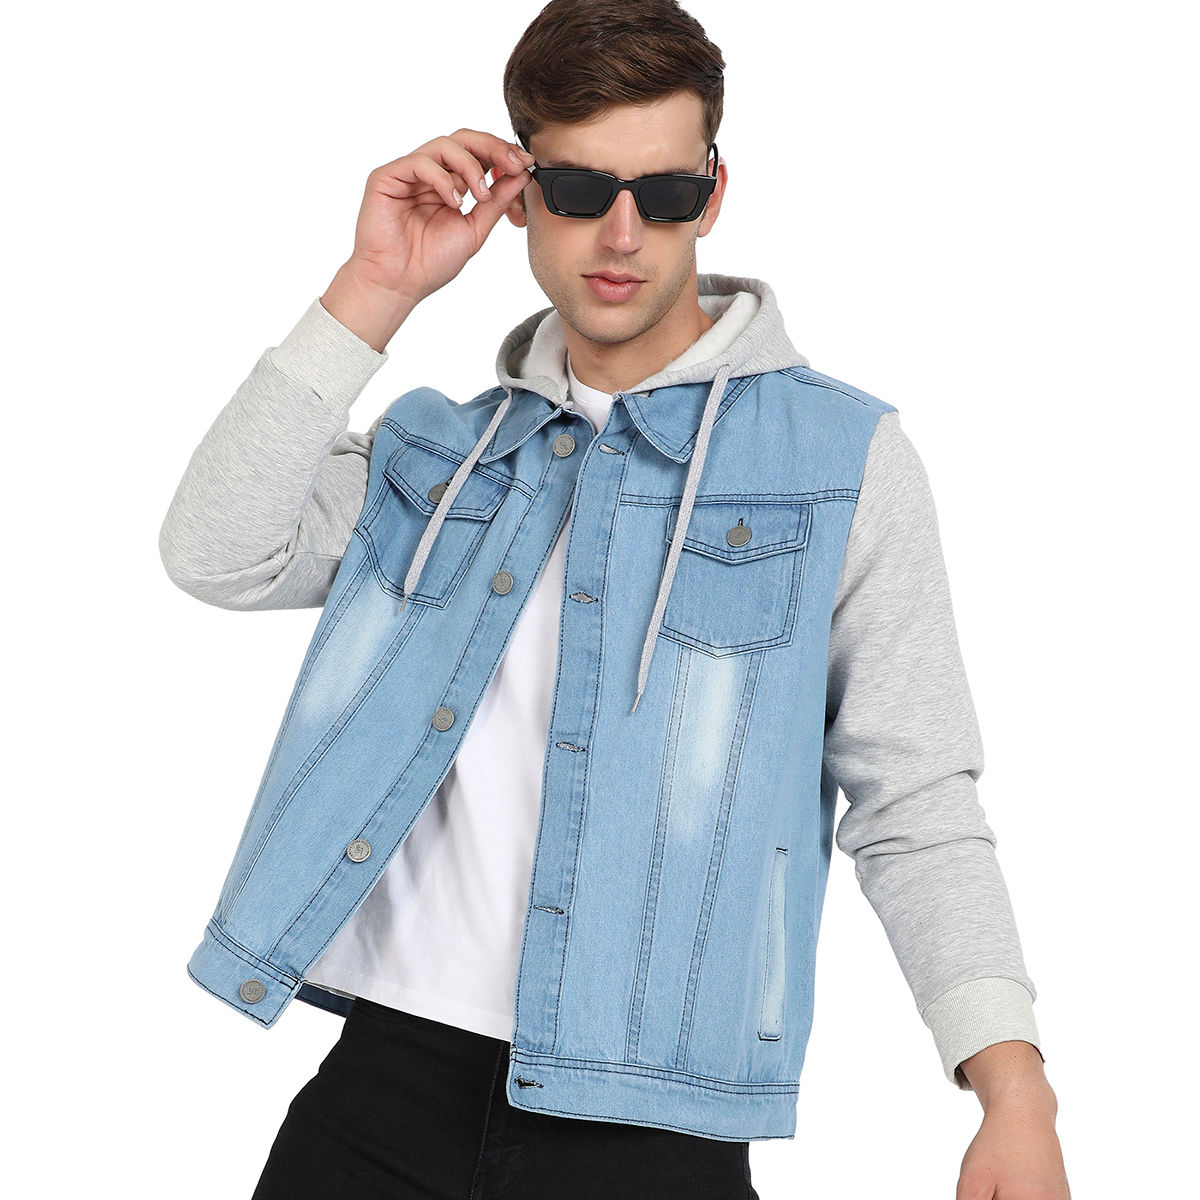 Blue Retro Denim Jacket For Men Casual Cotton Zip Up Jeans Coat For Men  With Stand Collar, Oversized Fit For Boys 3XL 4XL From Dwayverda, $44.42 |  DHgate.Com